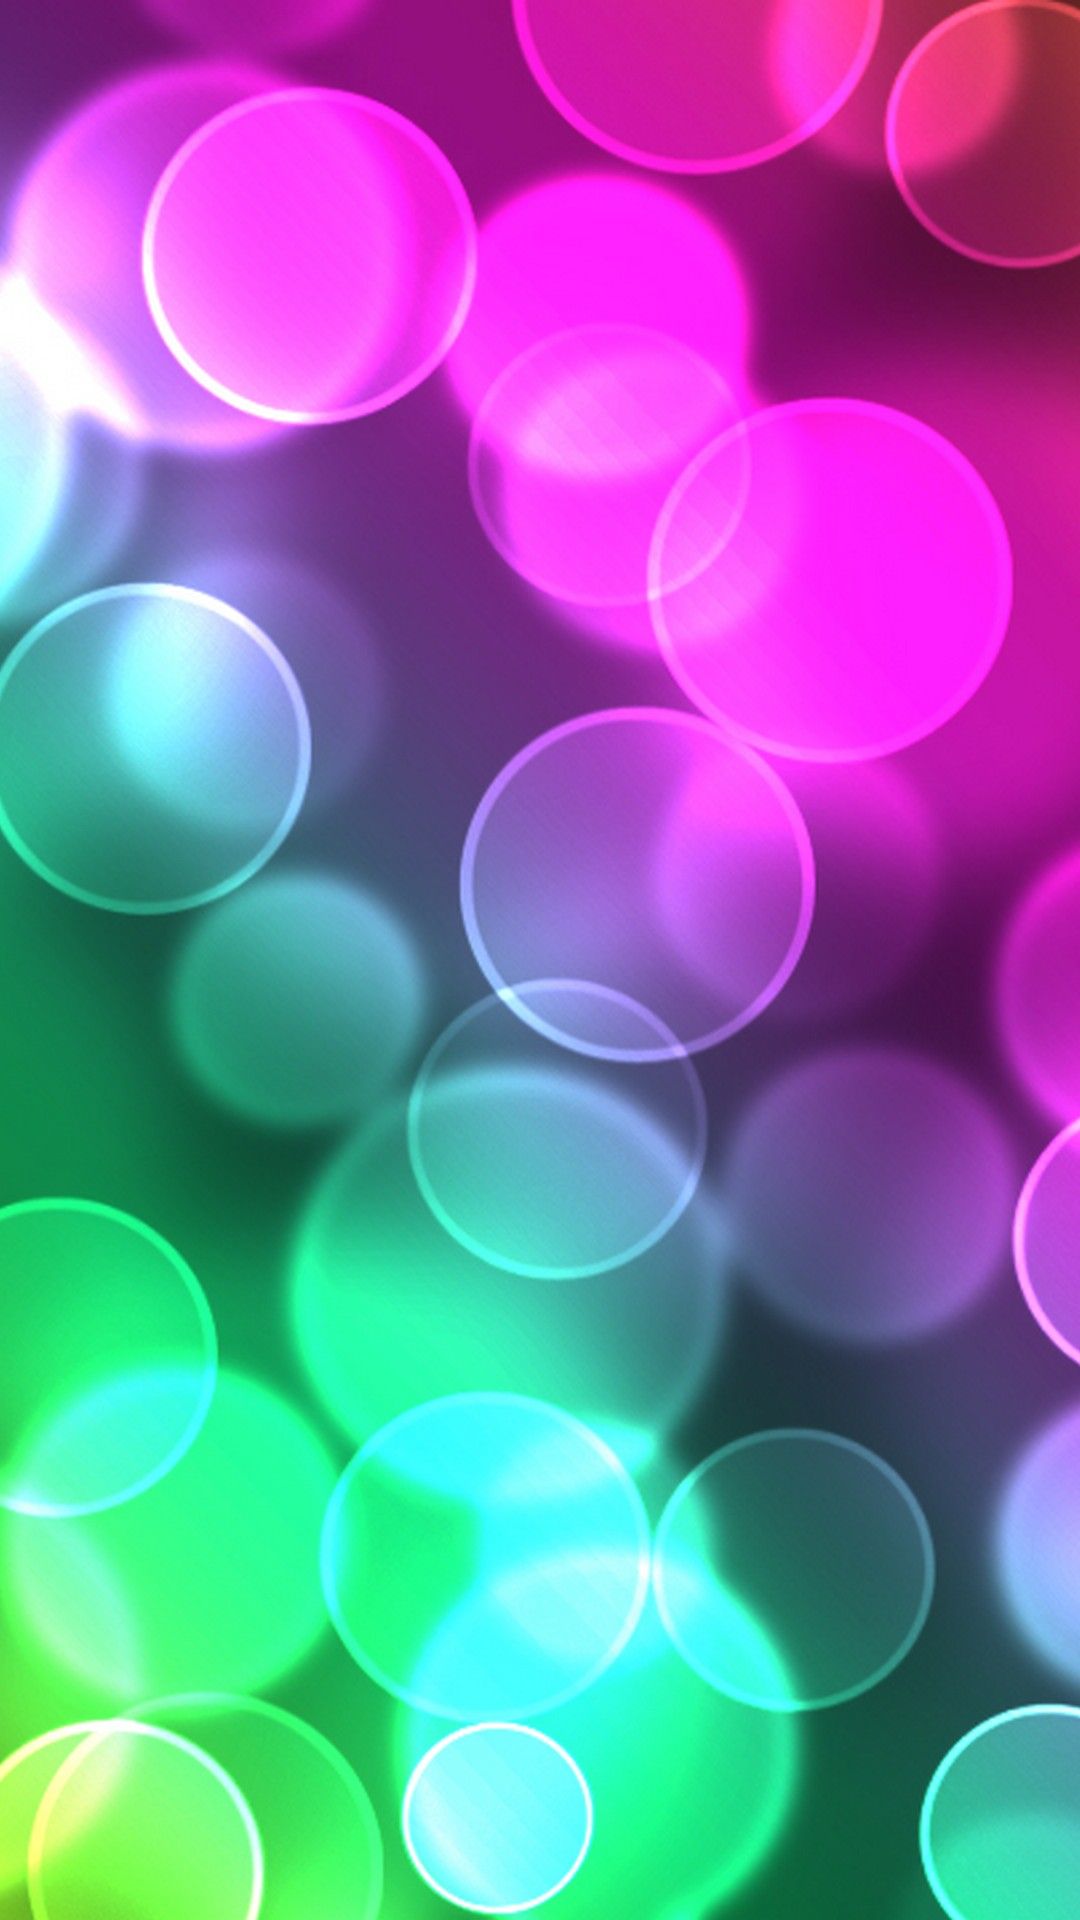 Light Colorful Wallpaper Android Android Wallpaper